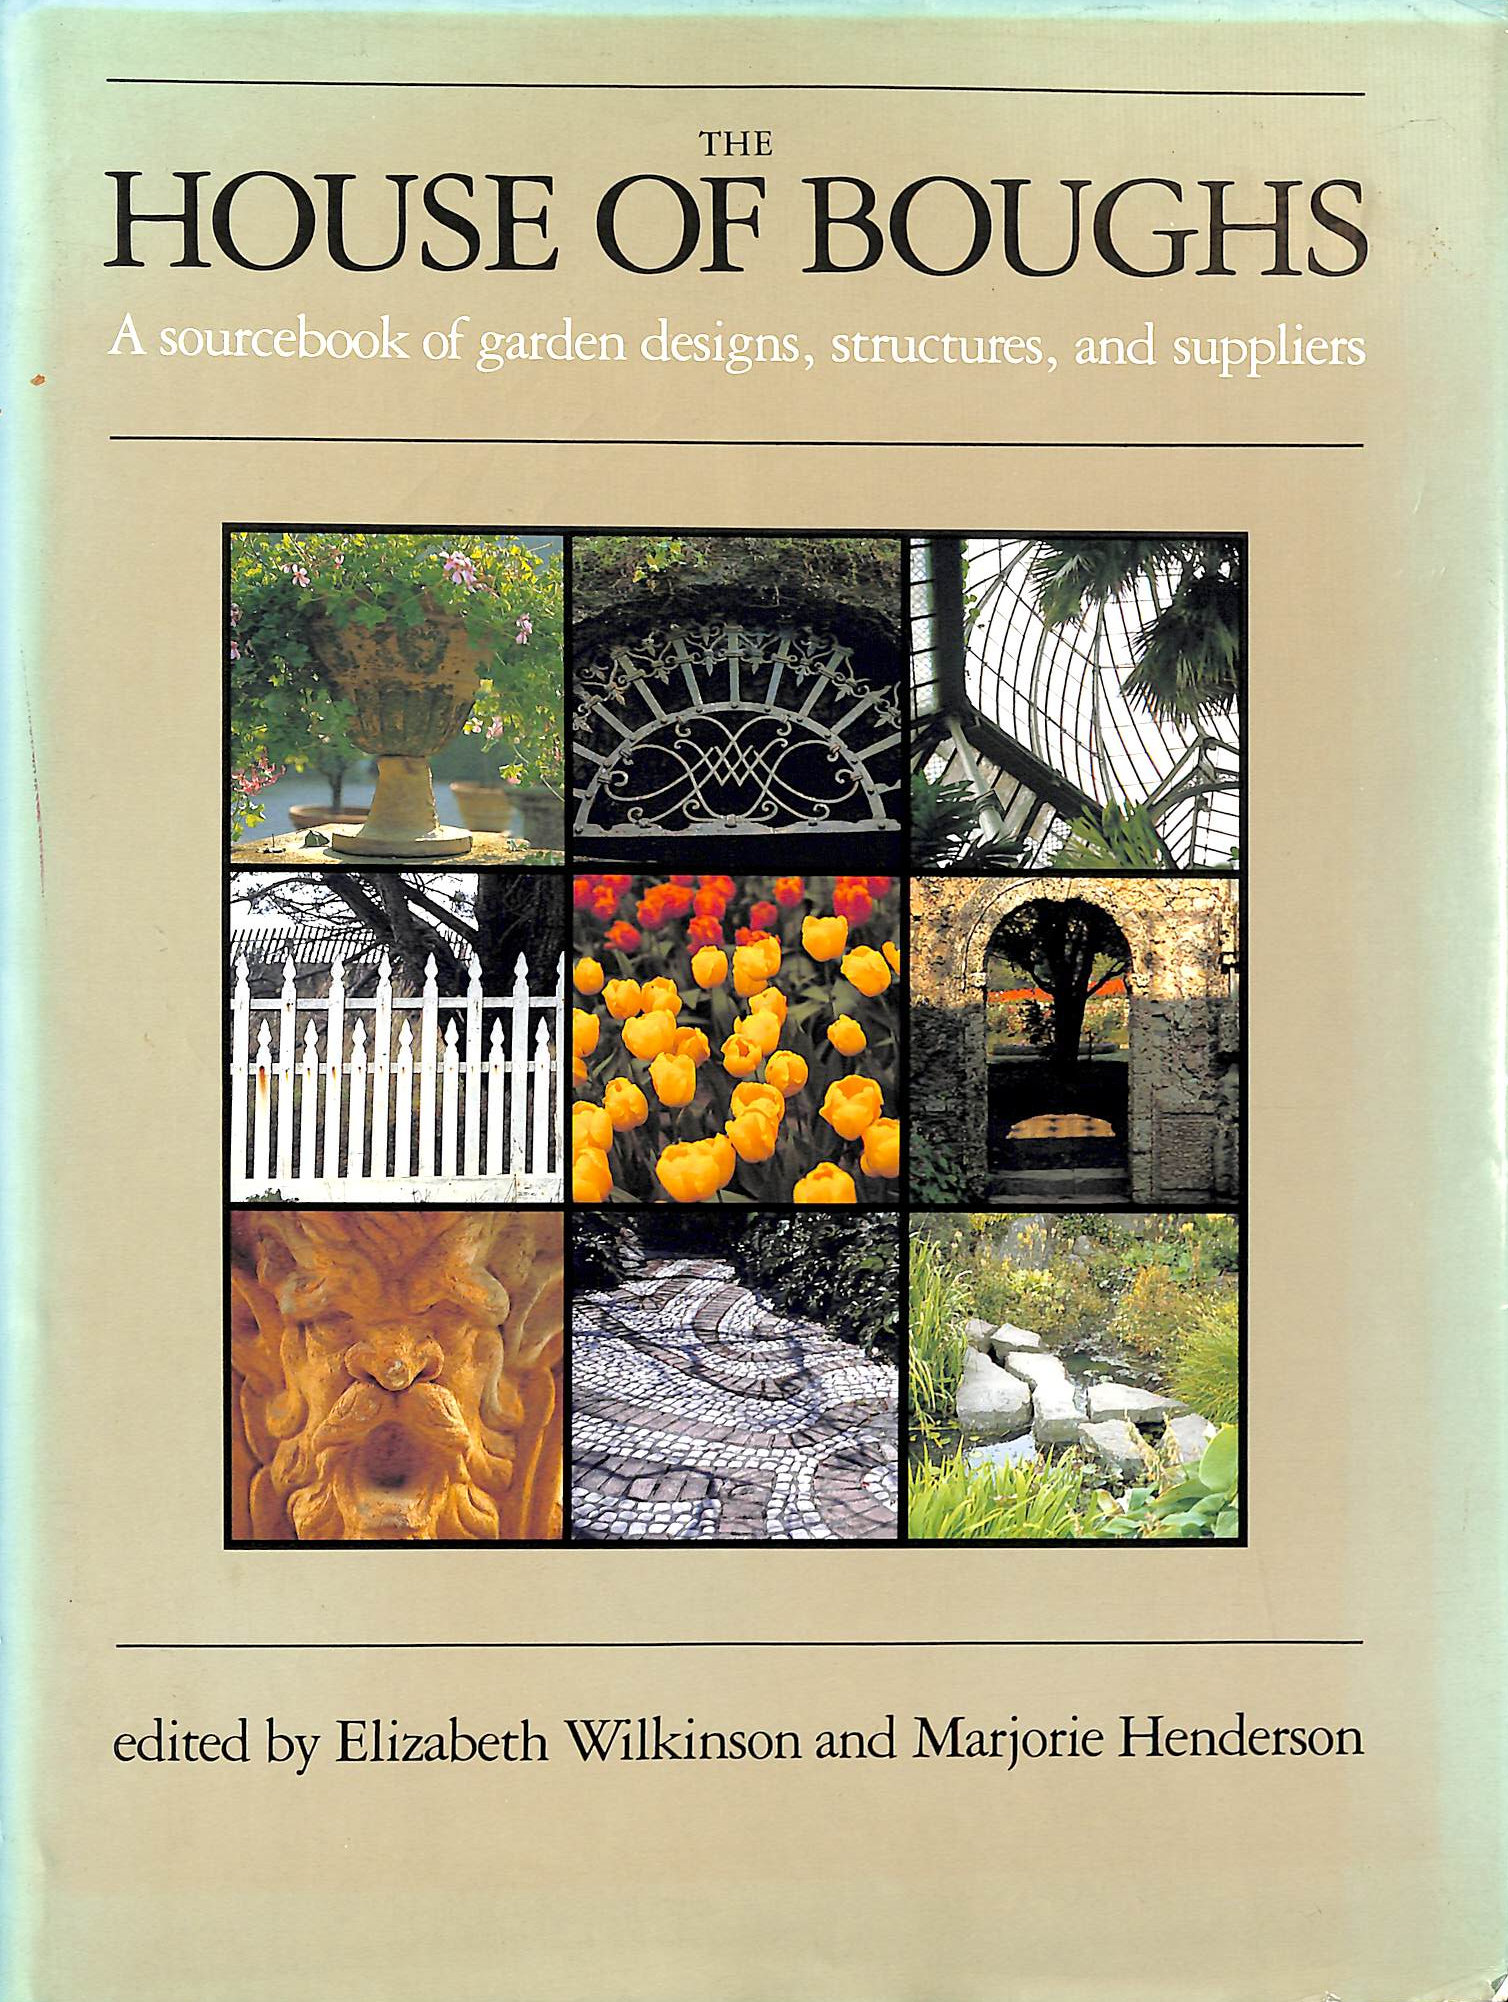 VARIOUS - The House of Boughs: A Sourcebook of Garden Designs, Structures, And Suppliers